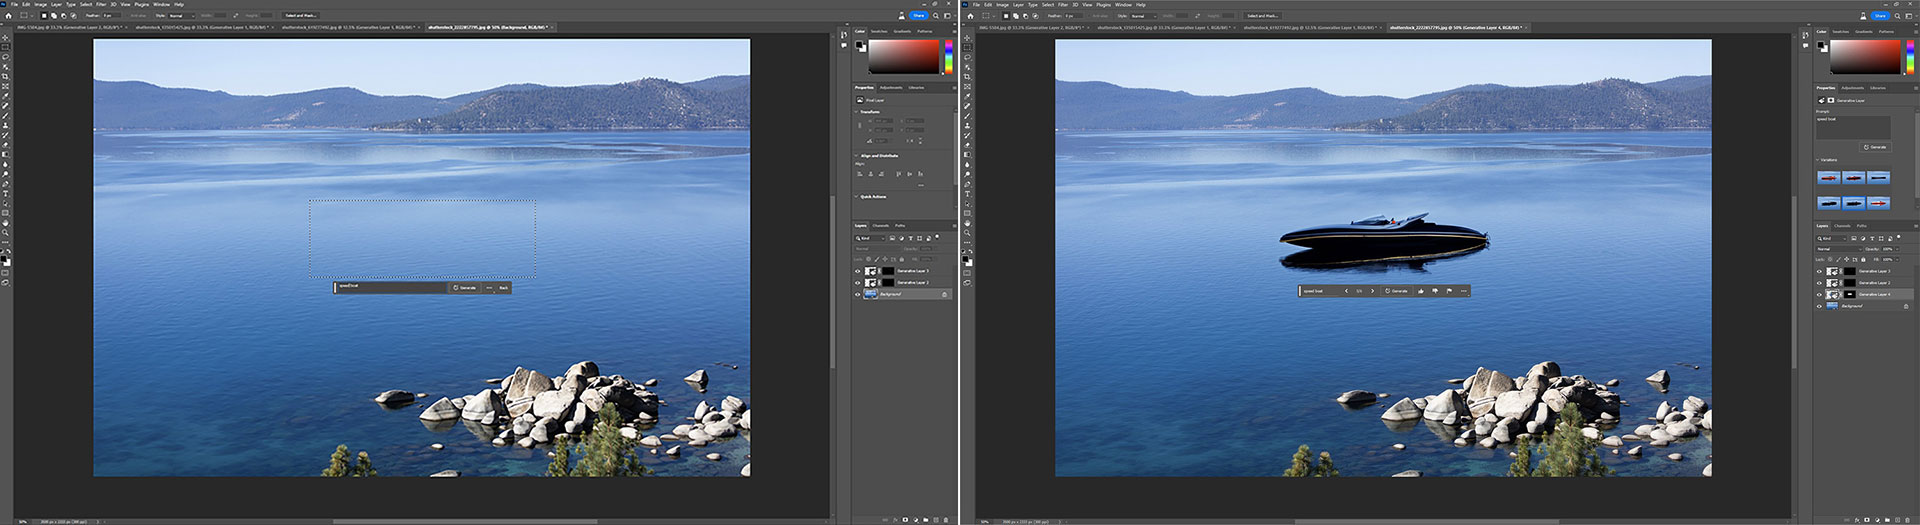 Two side-by-side images in Photoshop of a still lake with mountains in the distance showing the before and after of using Generative Fill to add in a speed boat atop the lake.